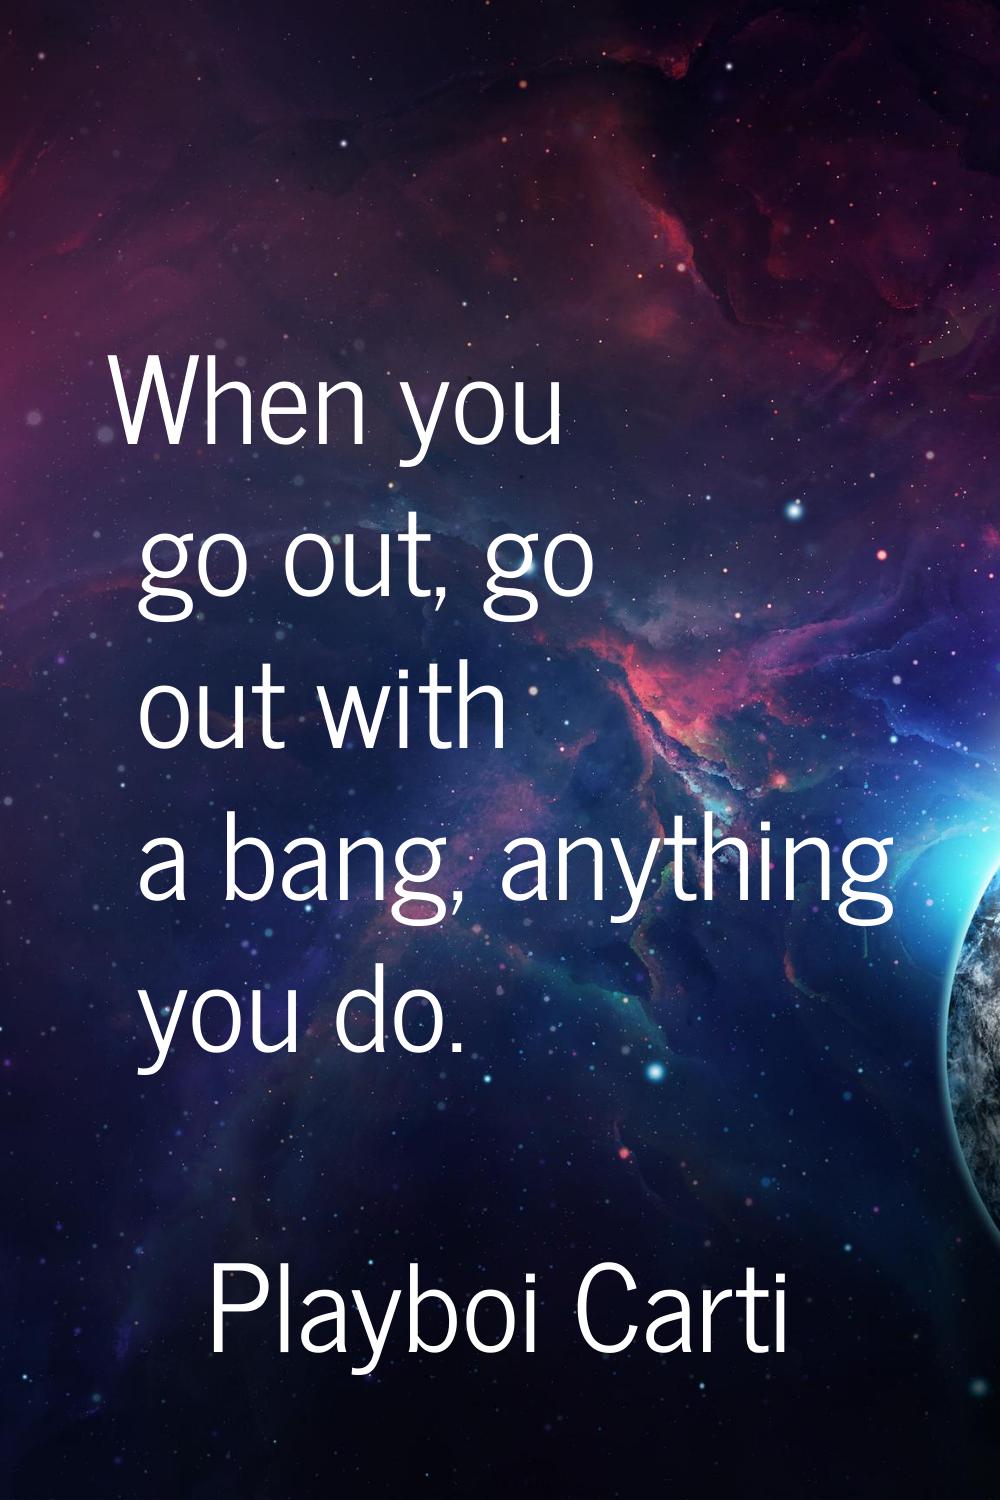 When you go out, go out with a bang, anything you do.